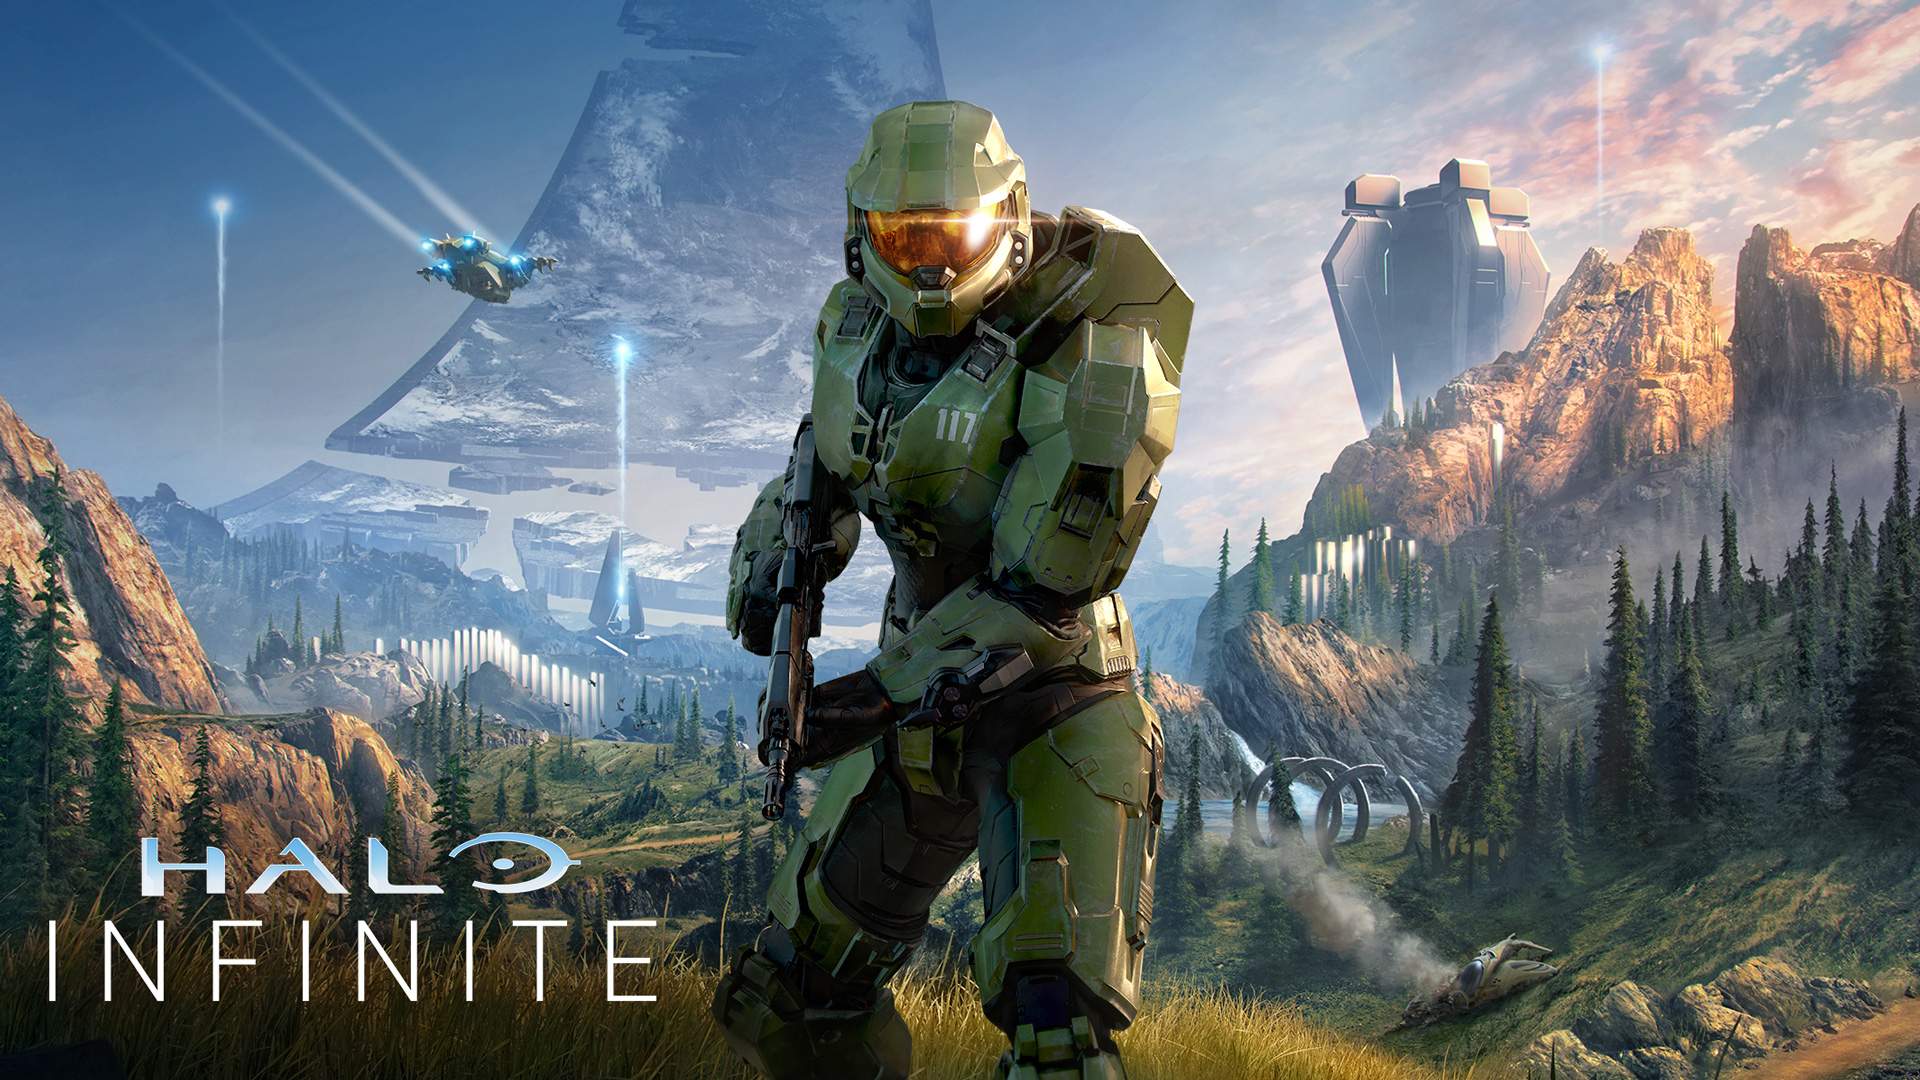 Microsoft shows off Halo Infinite's campaign for the first time in over a year